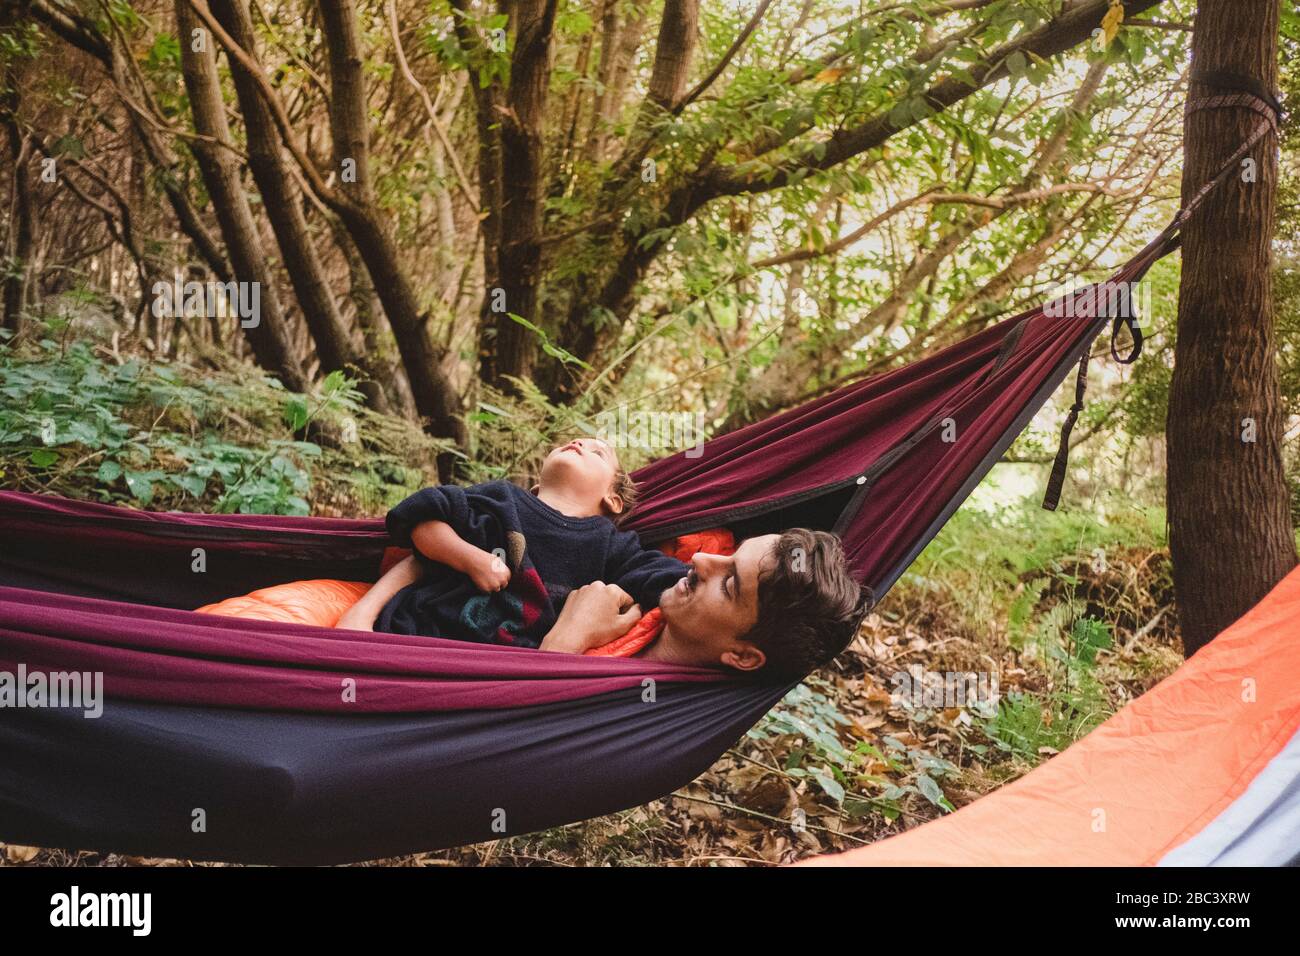 A man and a young kid lying in a hammock in the forest Stock Photo